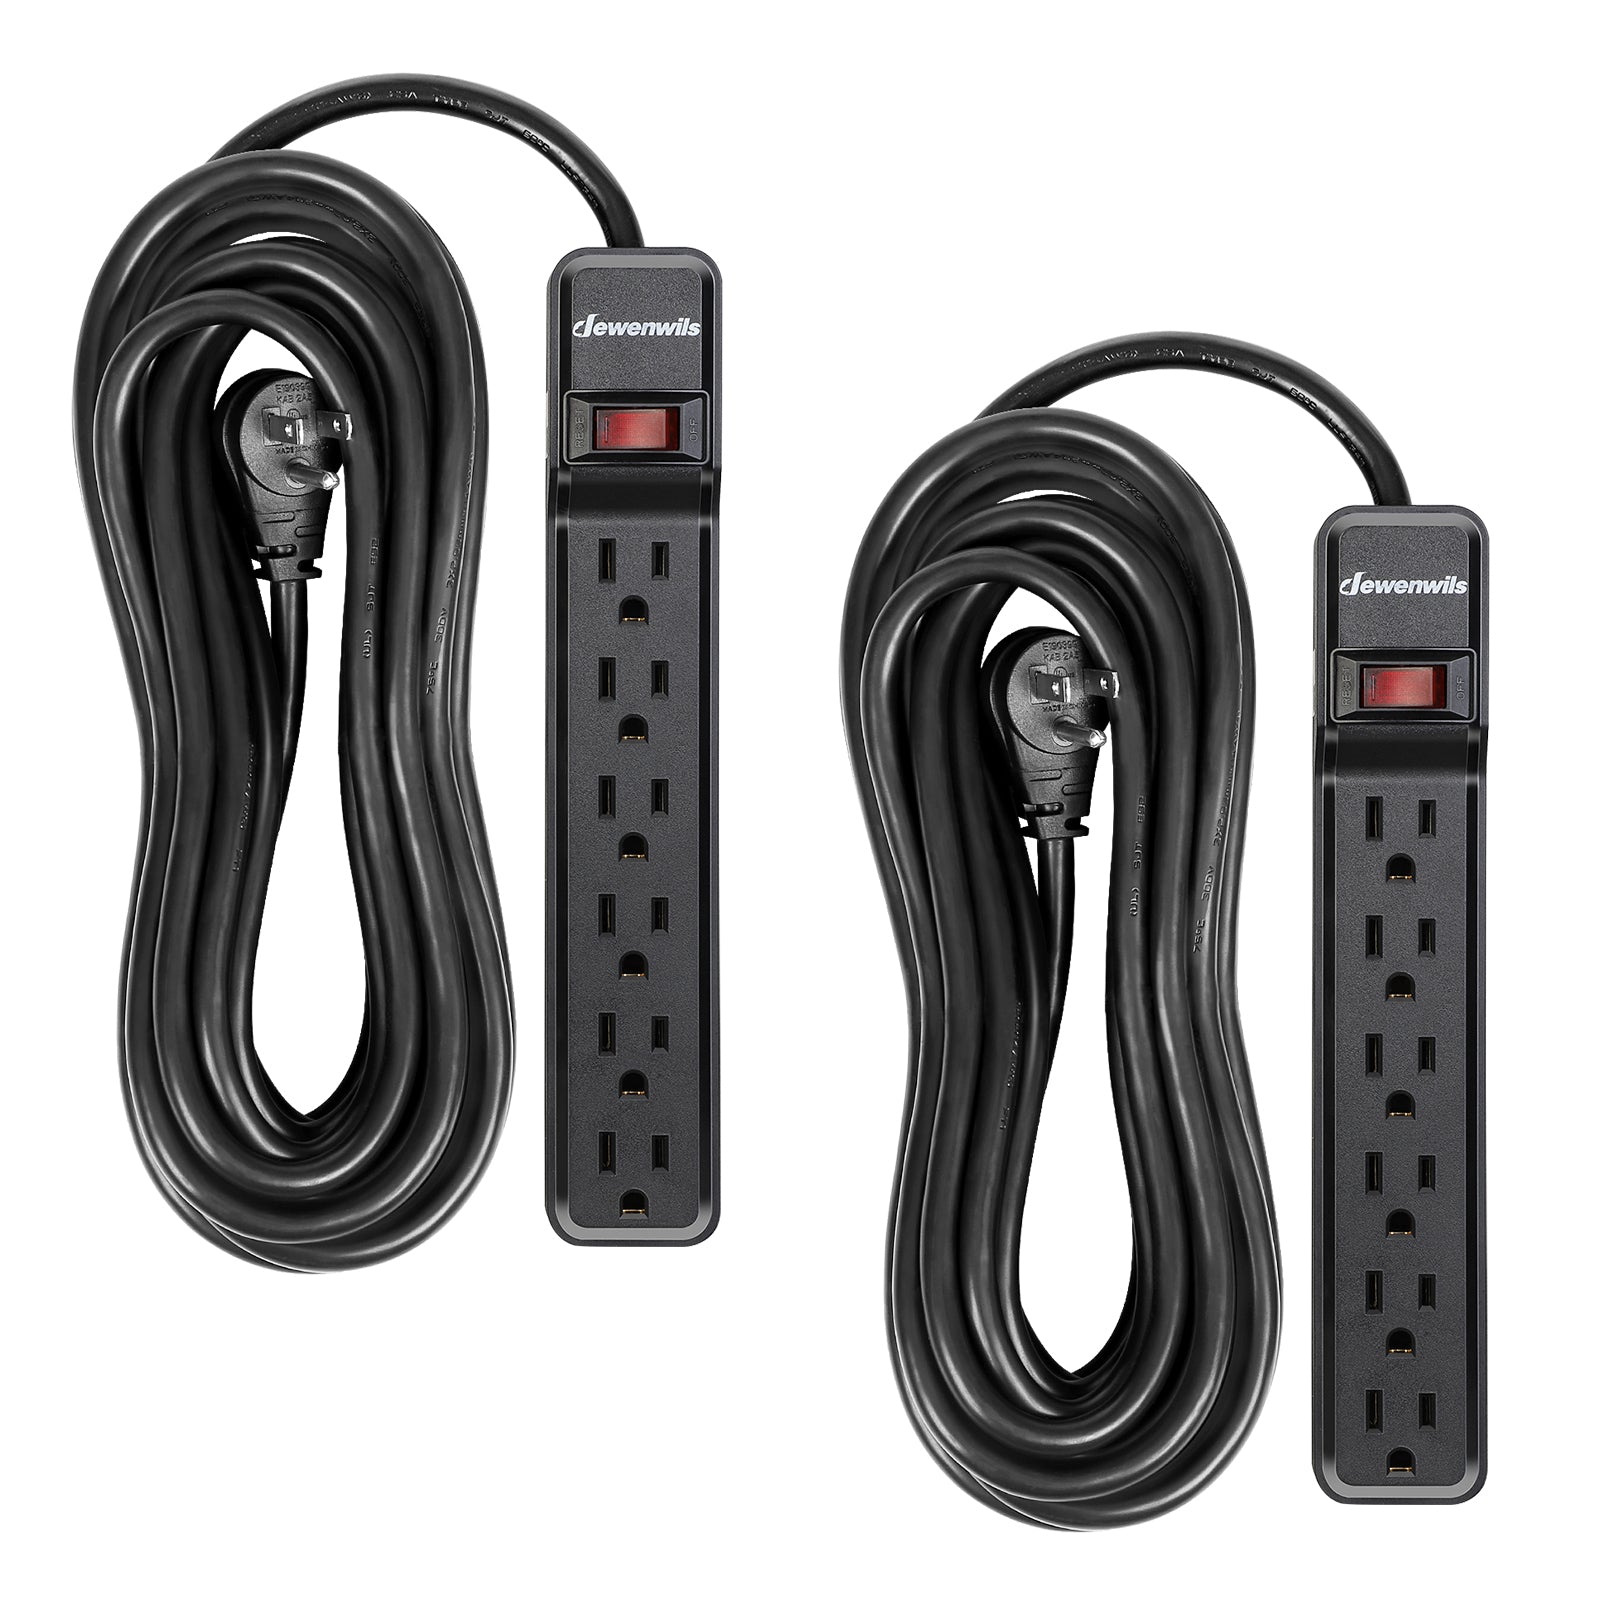 Low Profile Surge Protector Power Strip With Heavy Duty Surge